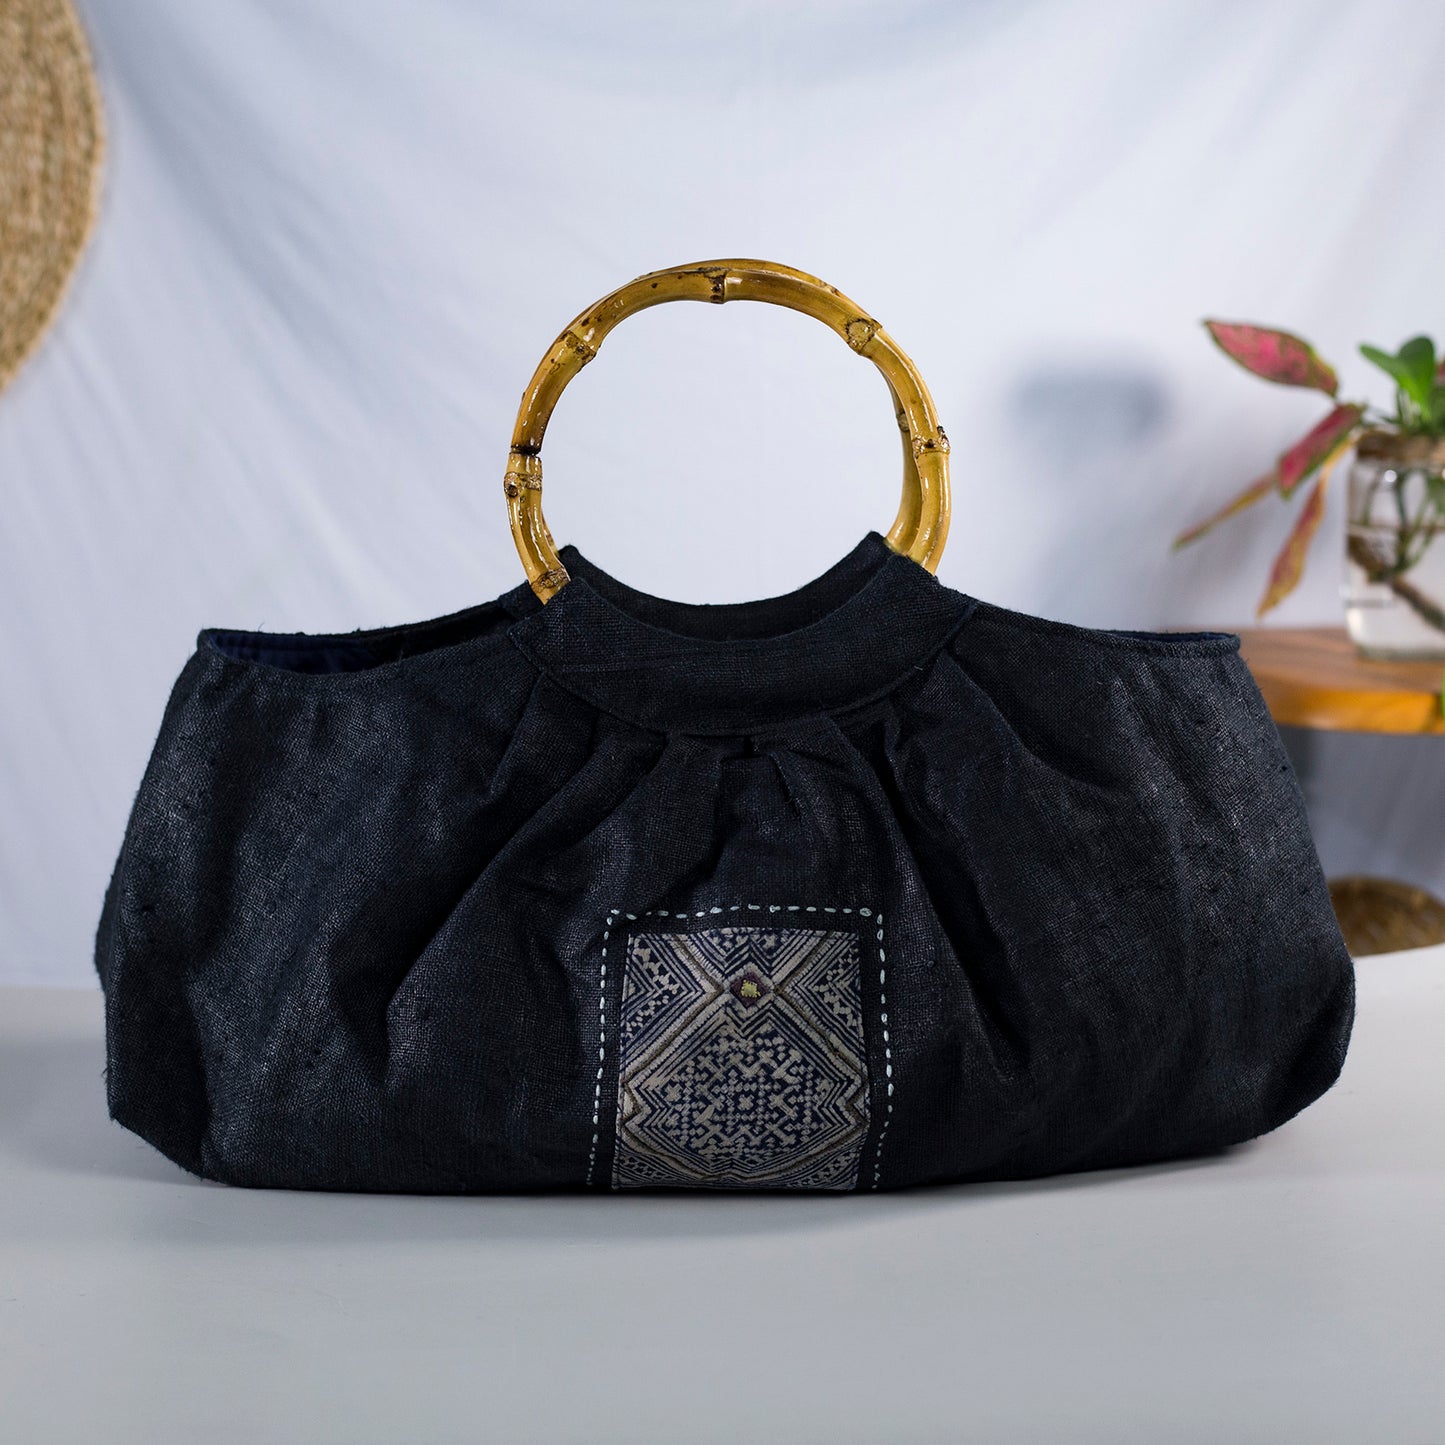 Bamboo handle bag, natural hemp in BLACK with vintage patch